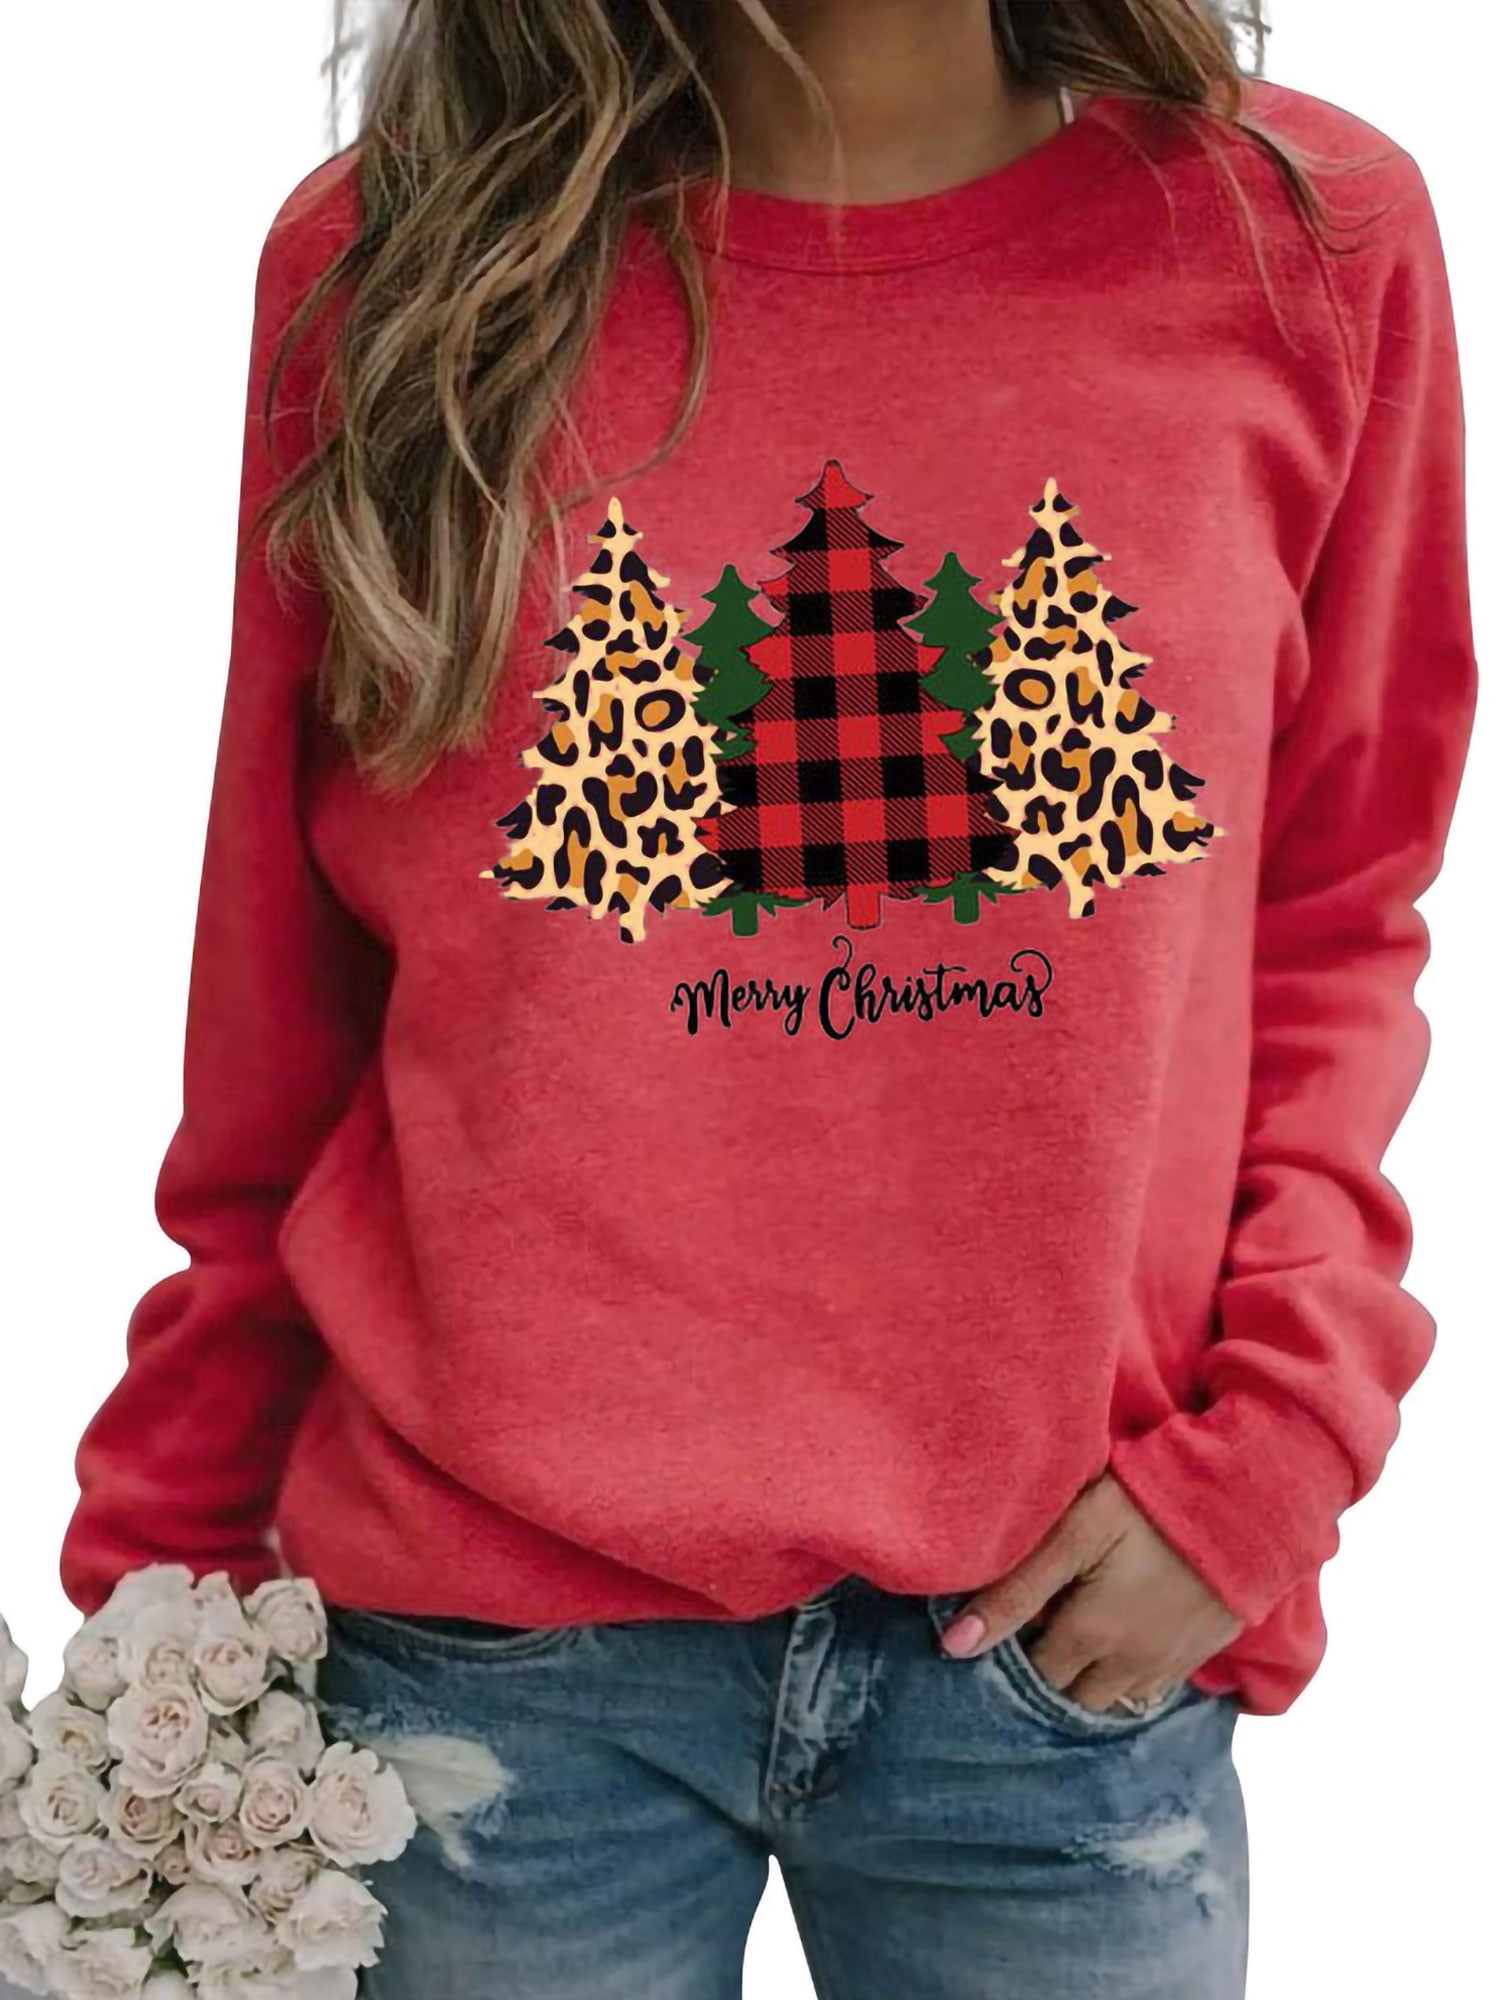 Womens Lightweight Crewneck Long Sleeve Christmas Funny Graphic Sweatshirts Casual Pullovers Fall Tops Tee Shirts